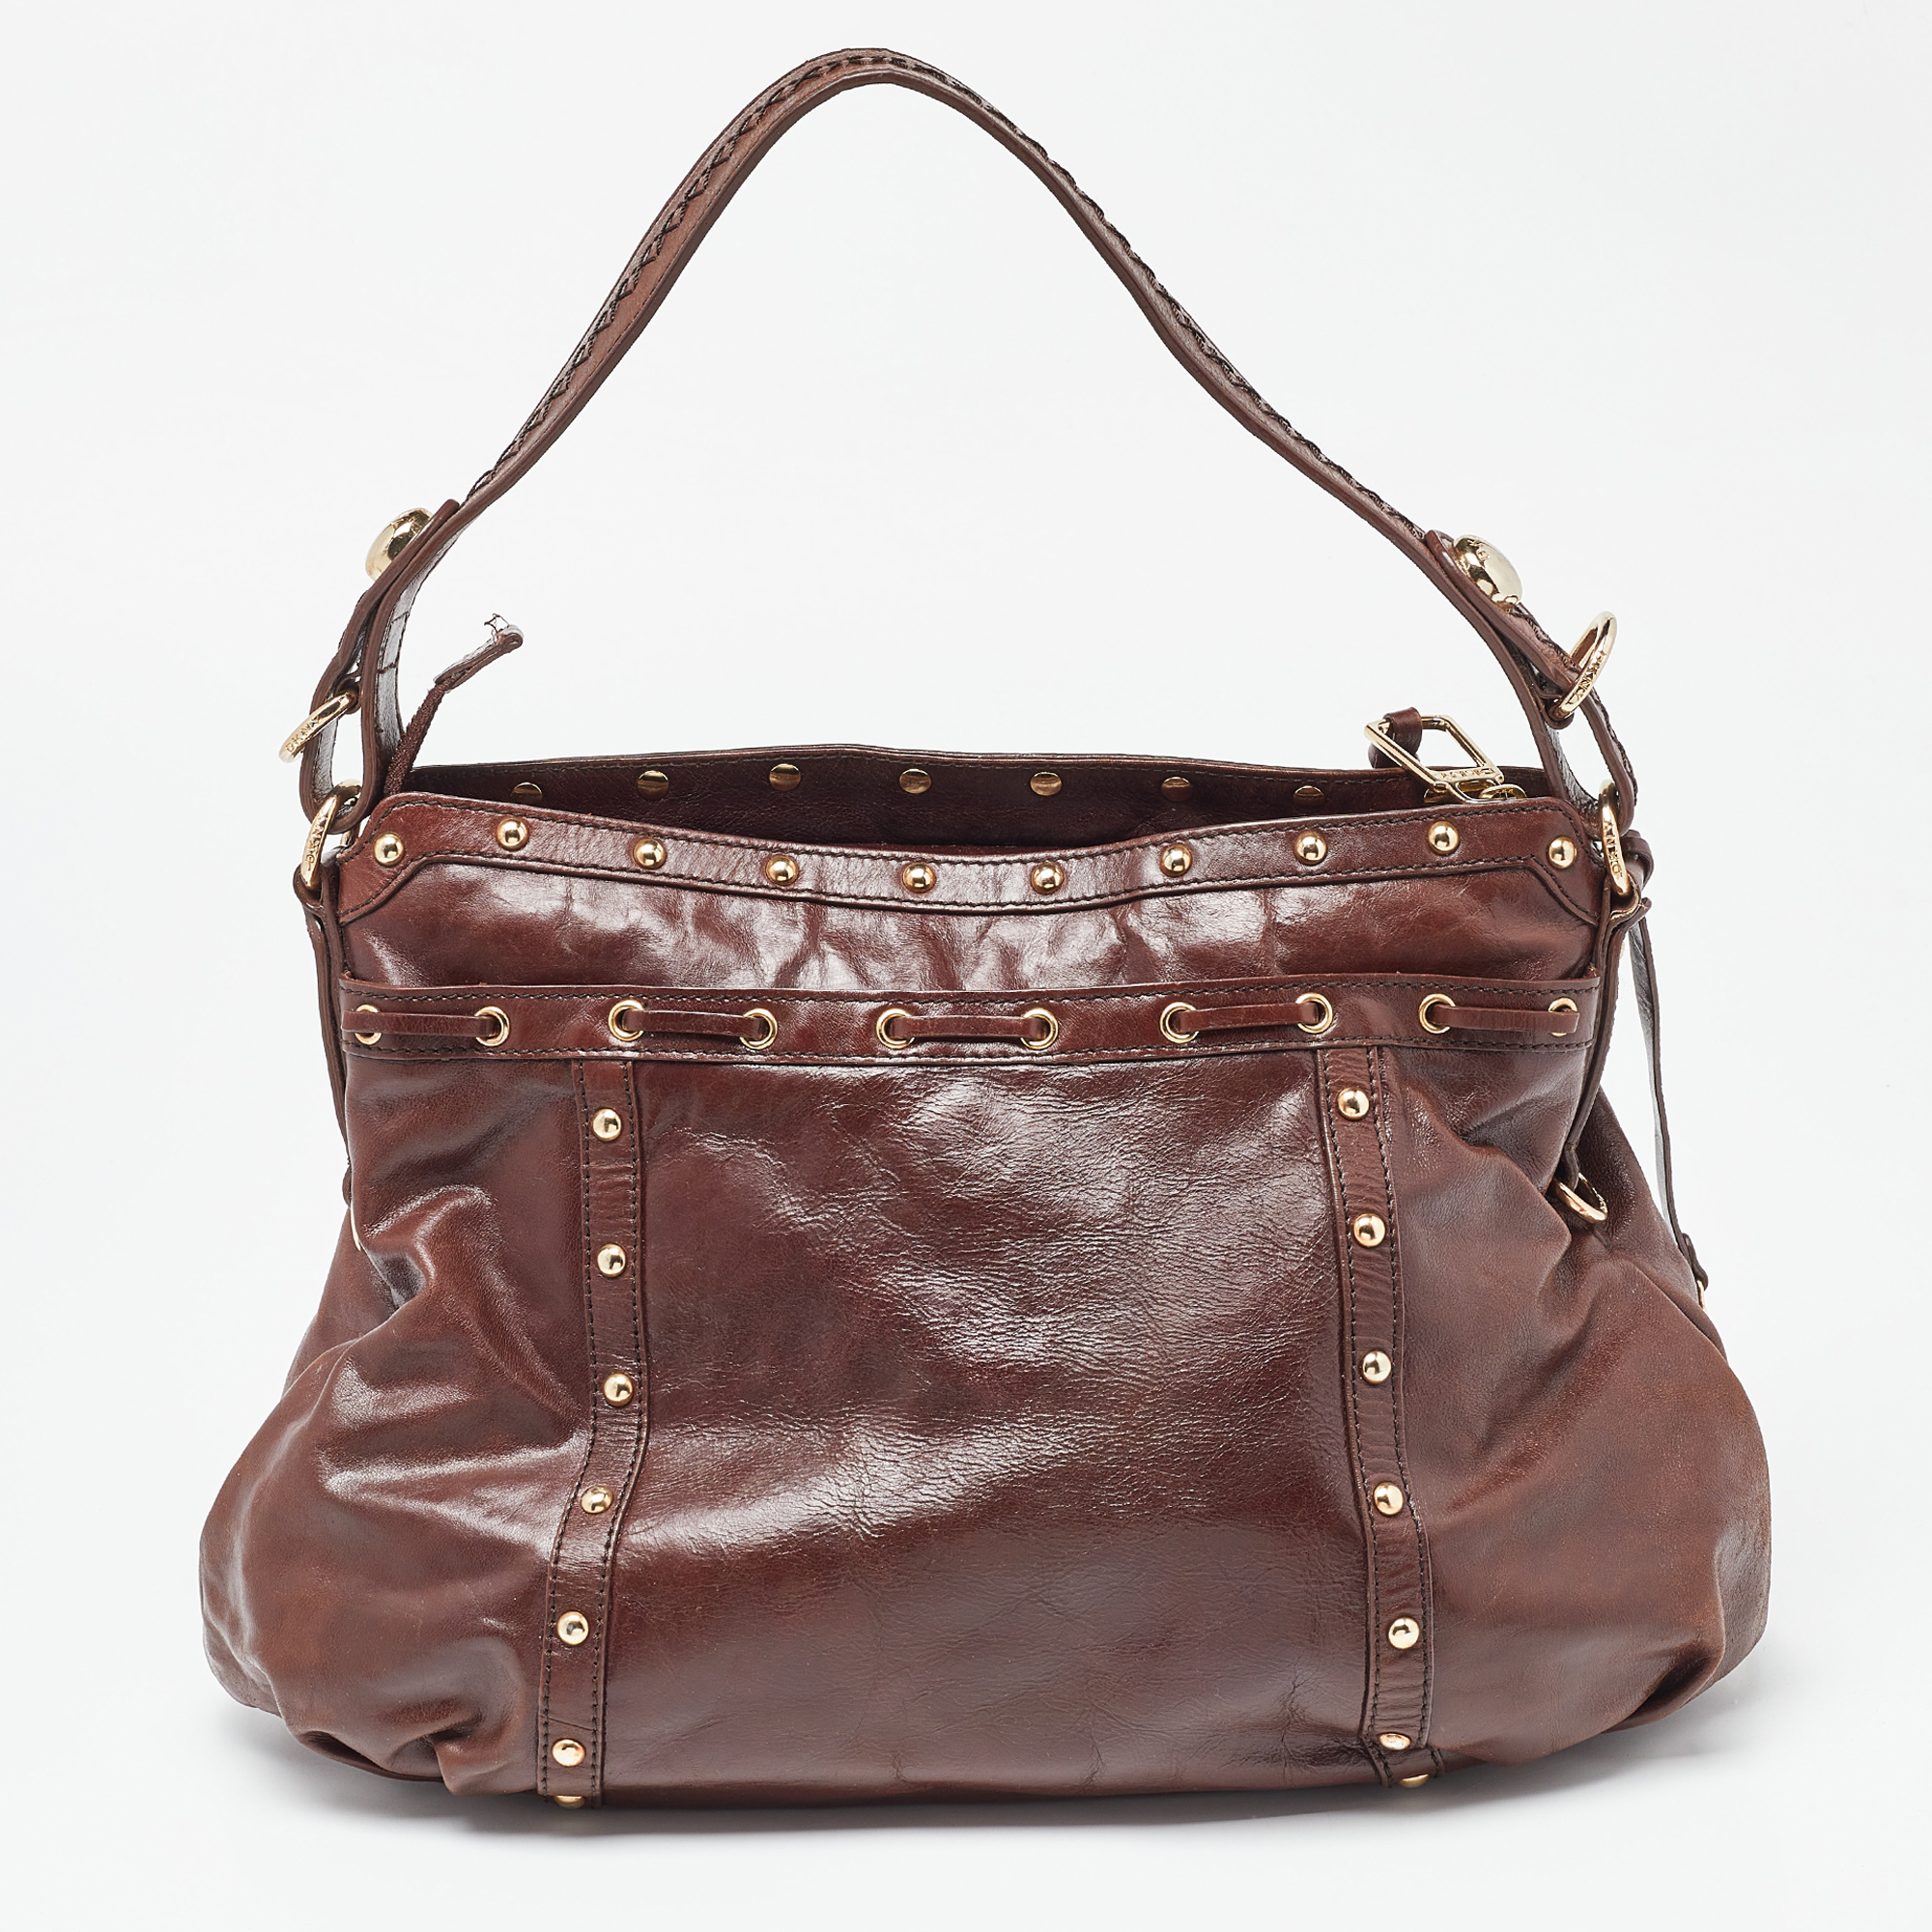 DKNY Brown Leather Studded Hobo